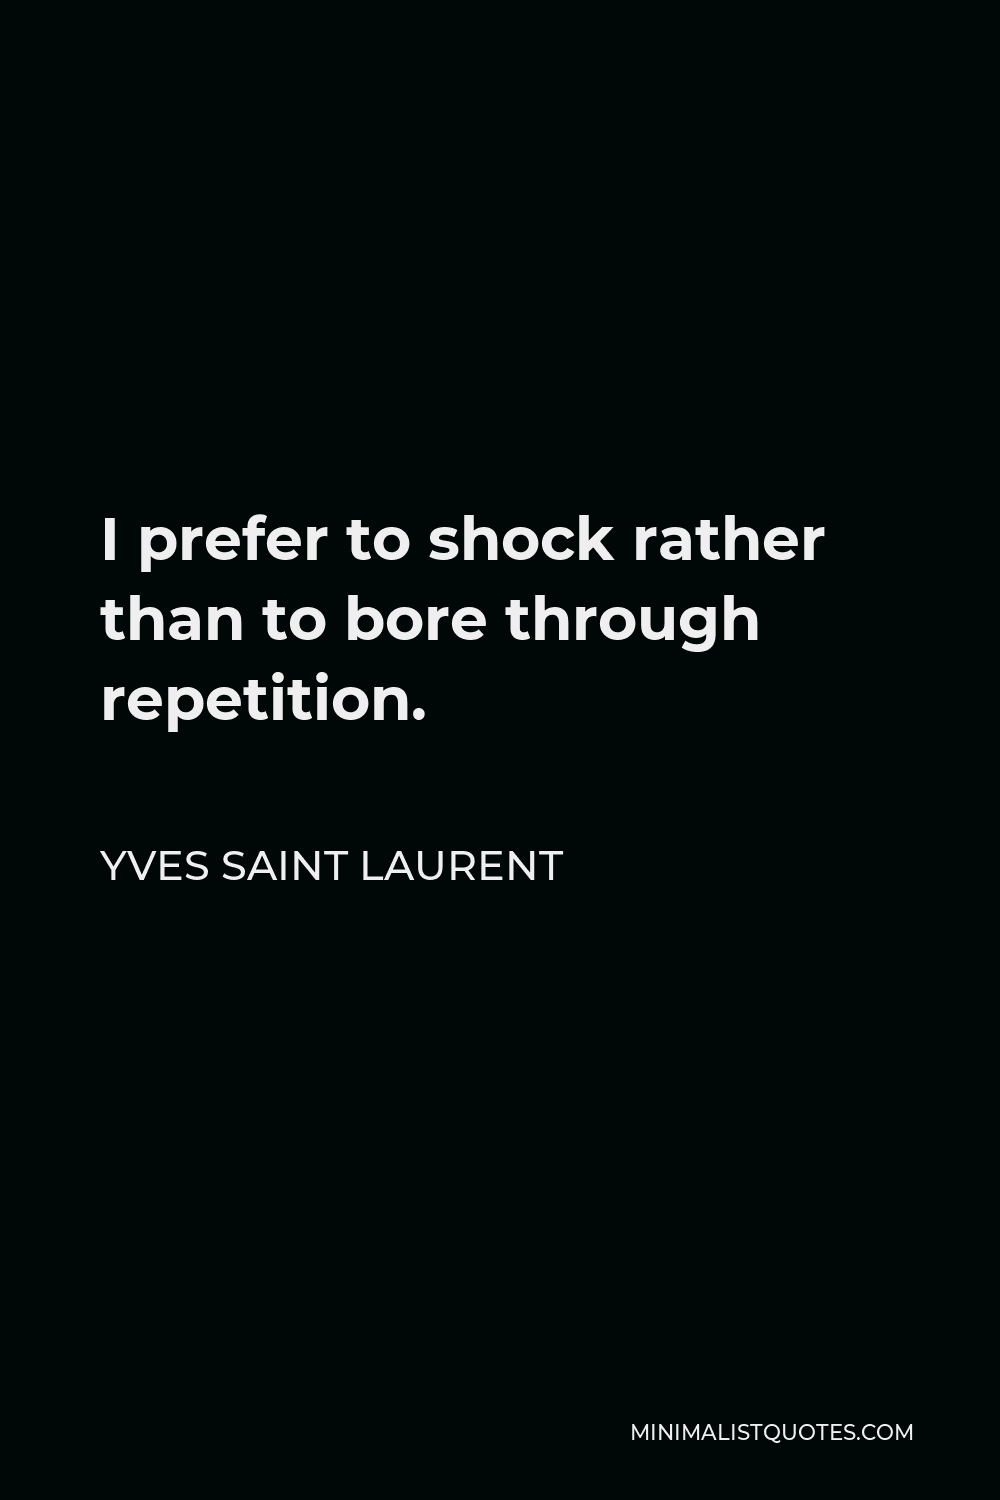 Yves Saint Laurent Quote - I prefer to shock rather than to bore through repetition.